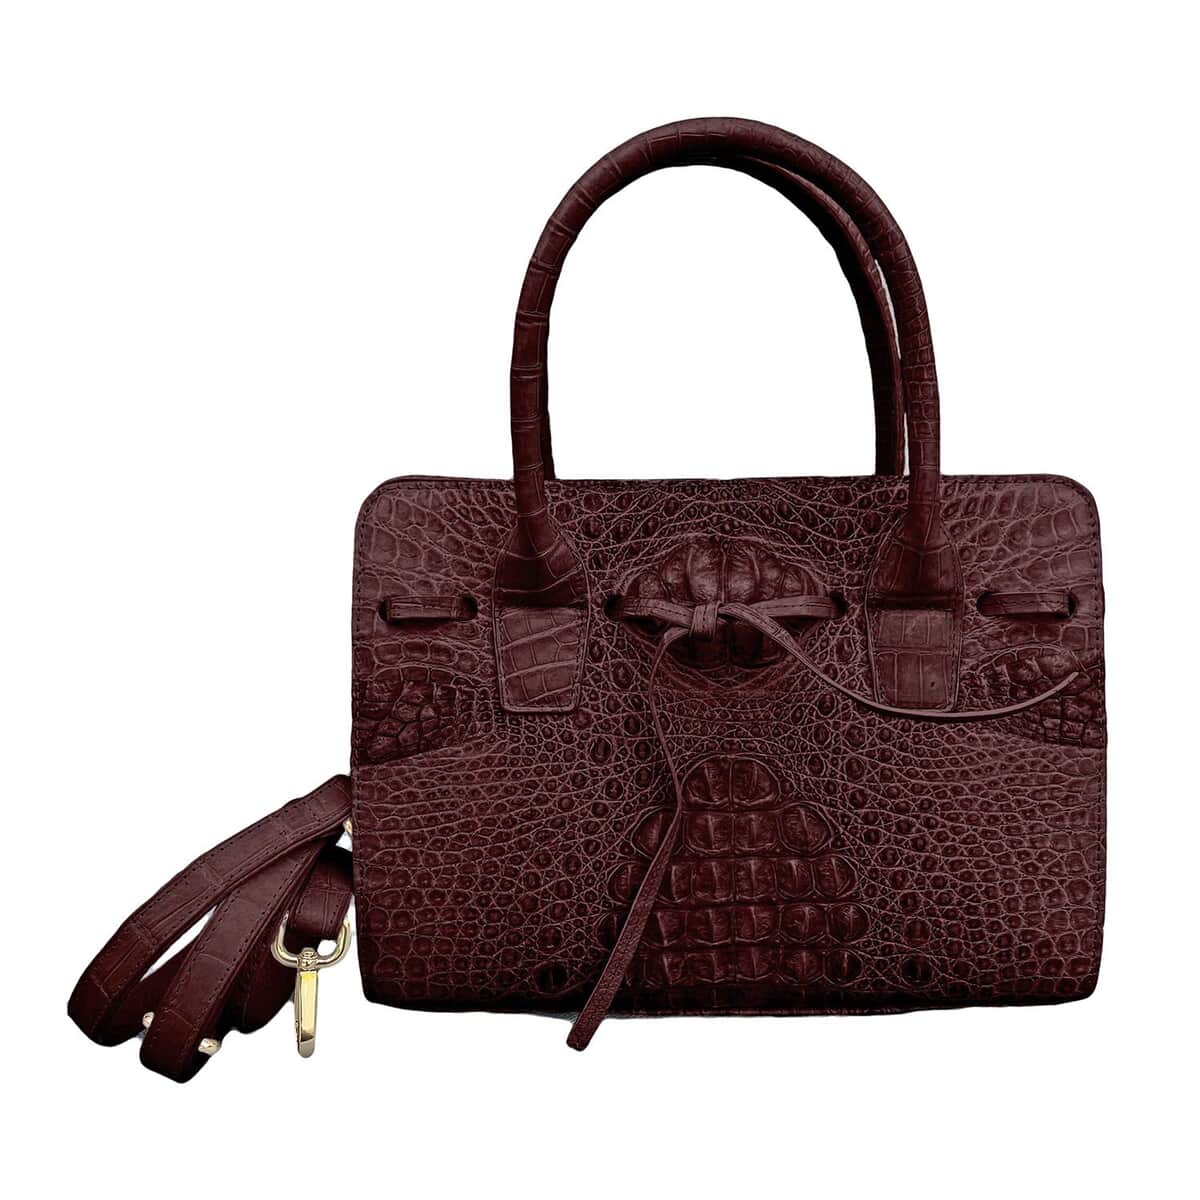 Grand Pelle Genuine Crocodile Leather Dark Chocolate Tote Bag (11"x4.3"x7.9") with Detachable Shoulder Strap image number 1